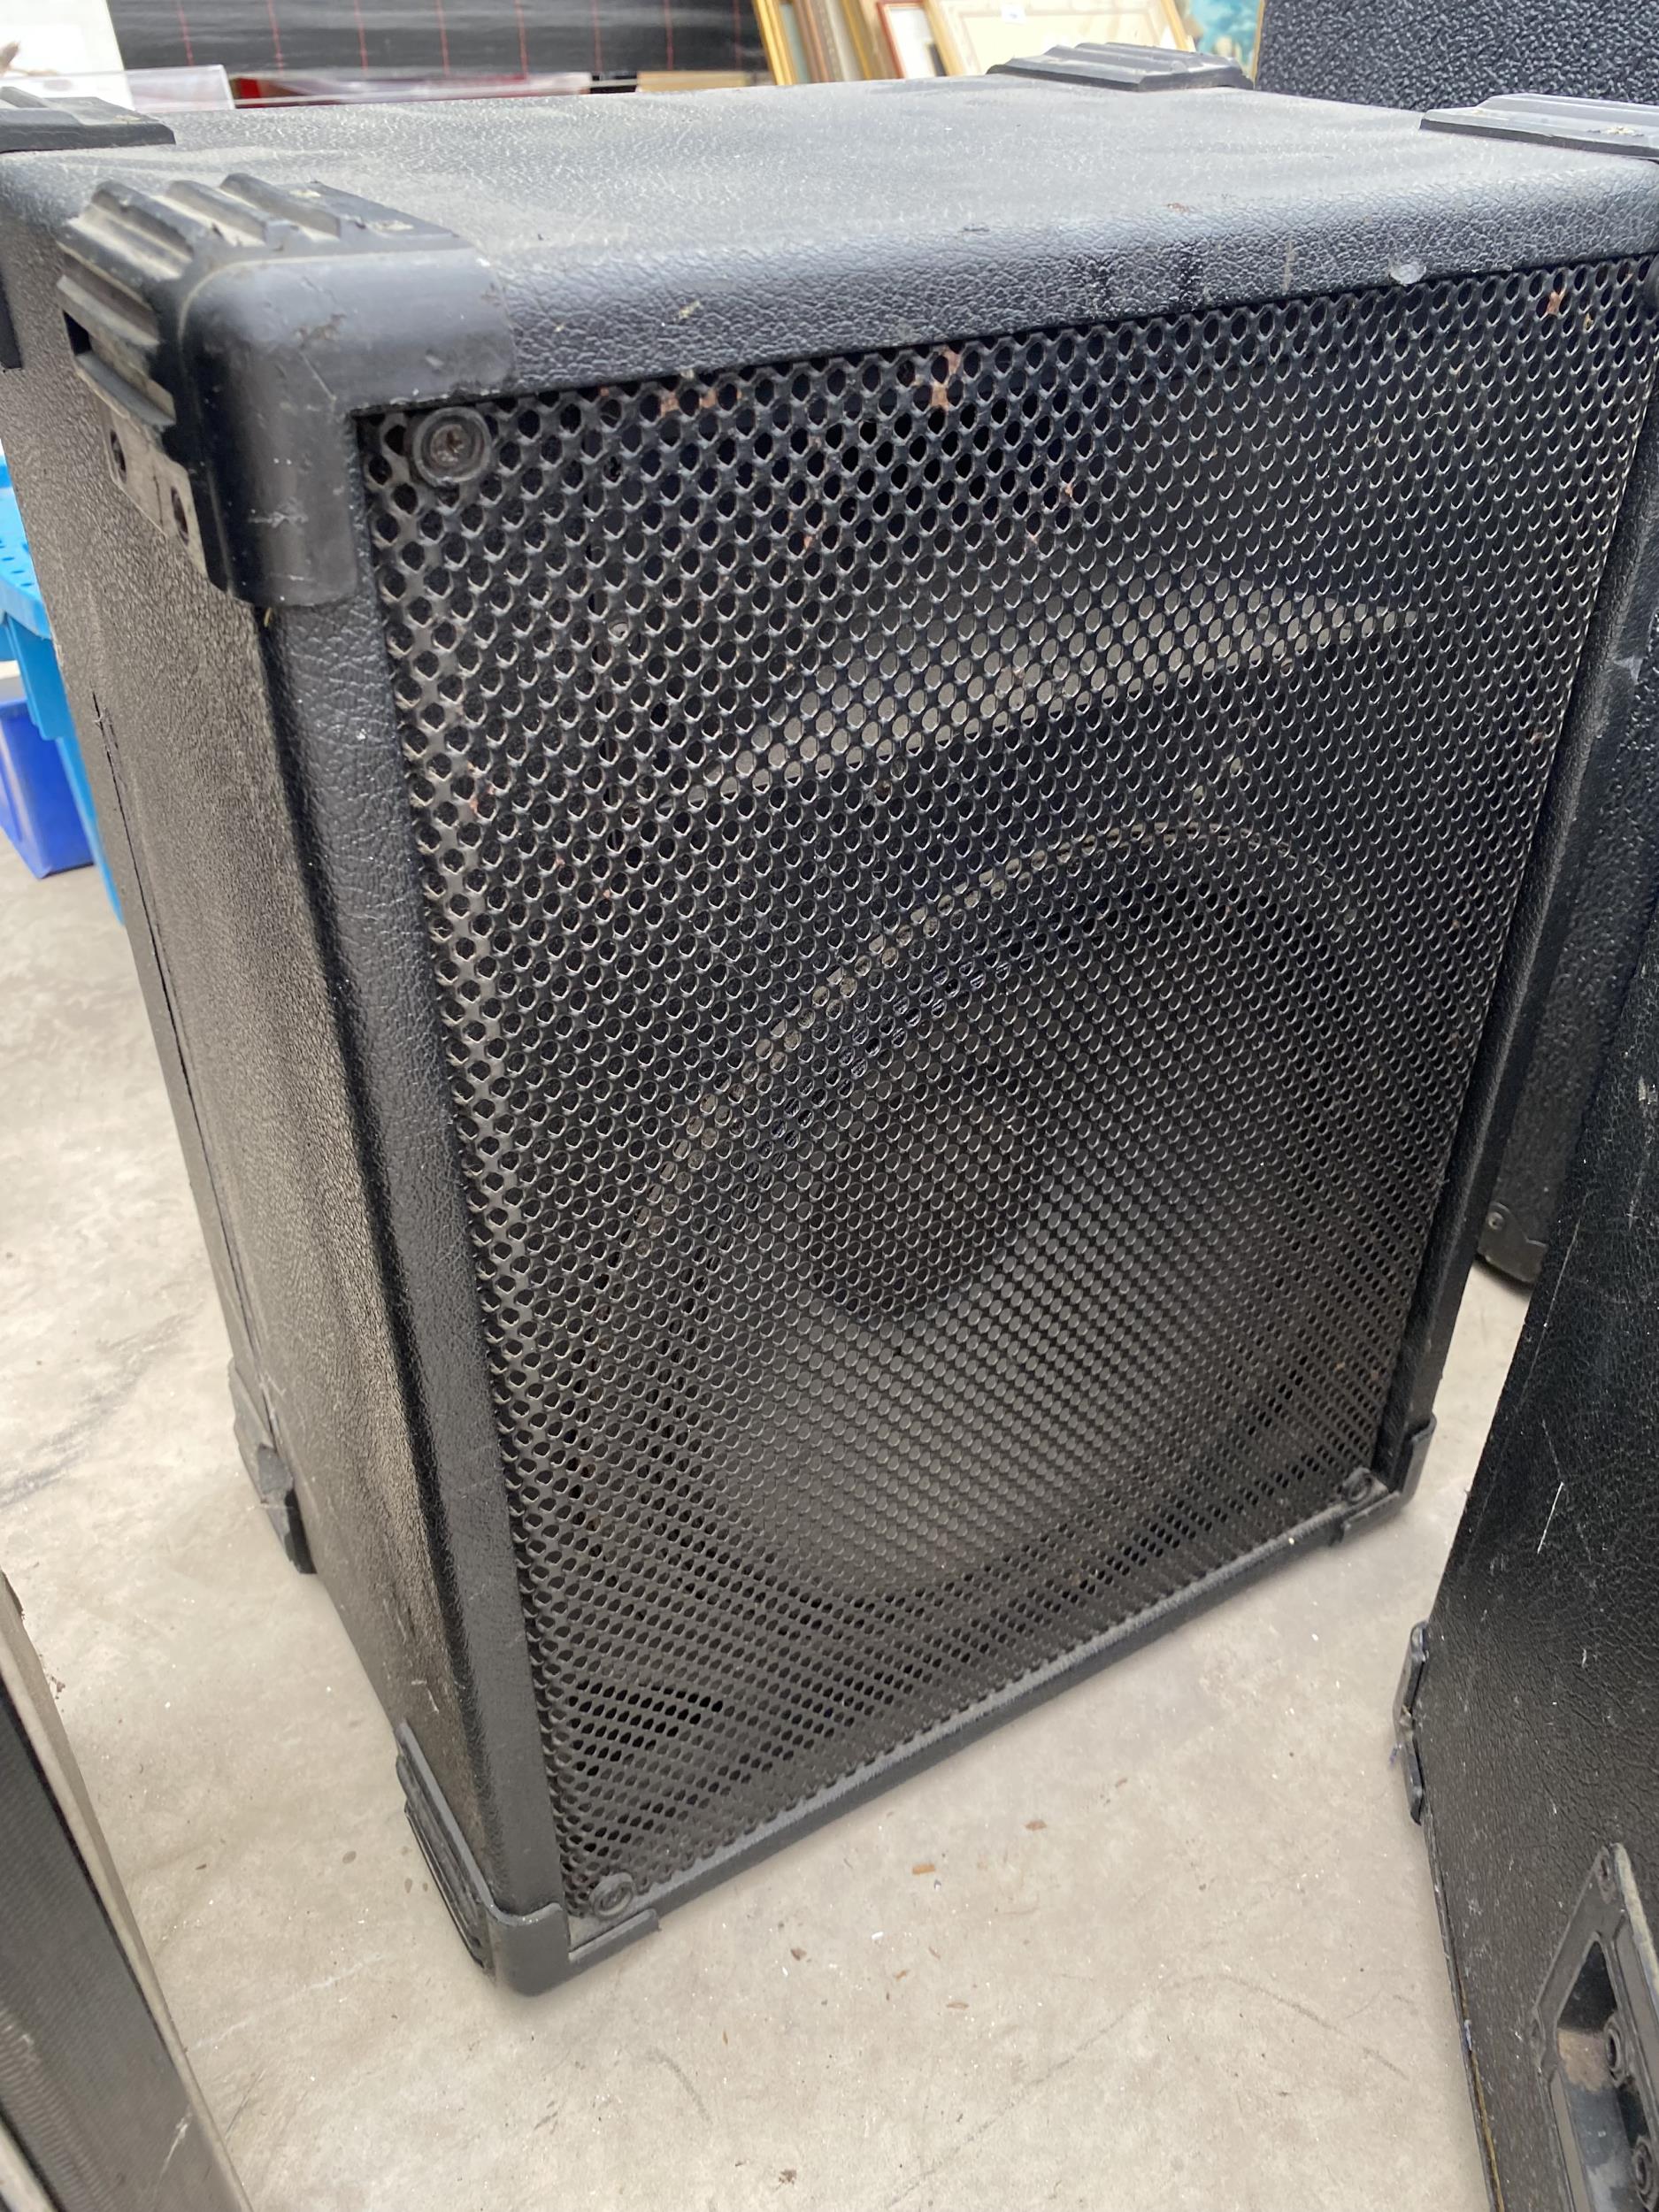 A PAIR OF LARGE SPEAKERS - Image 3 of 4